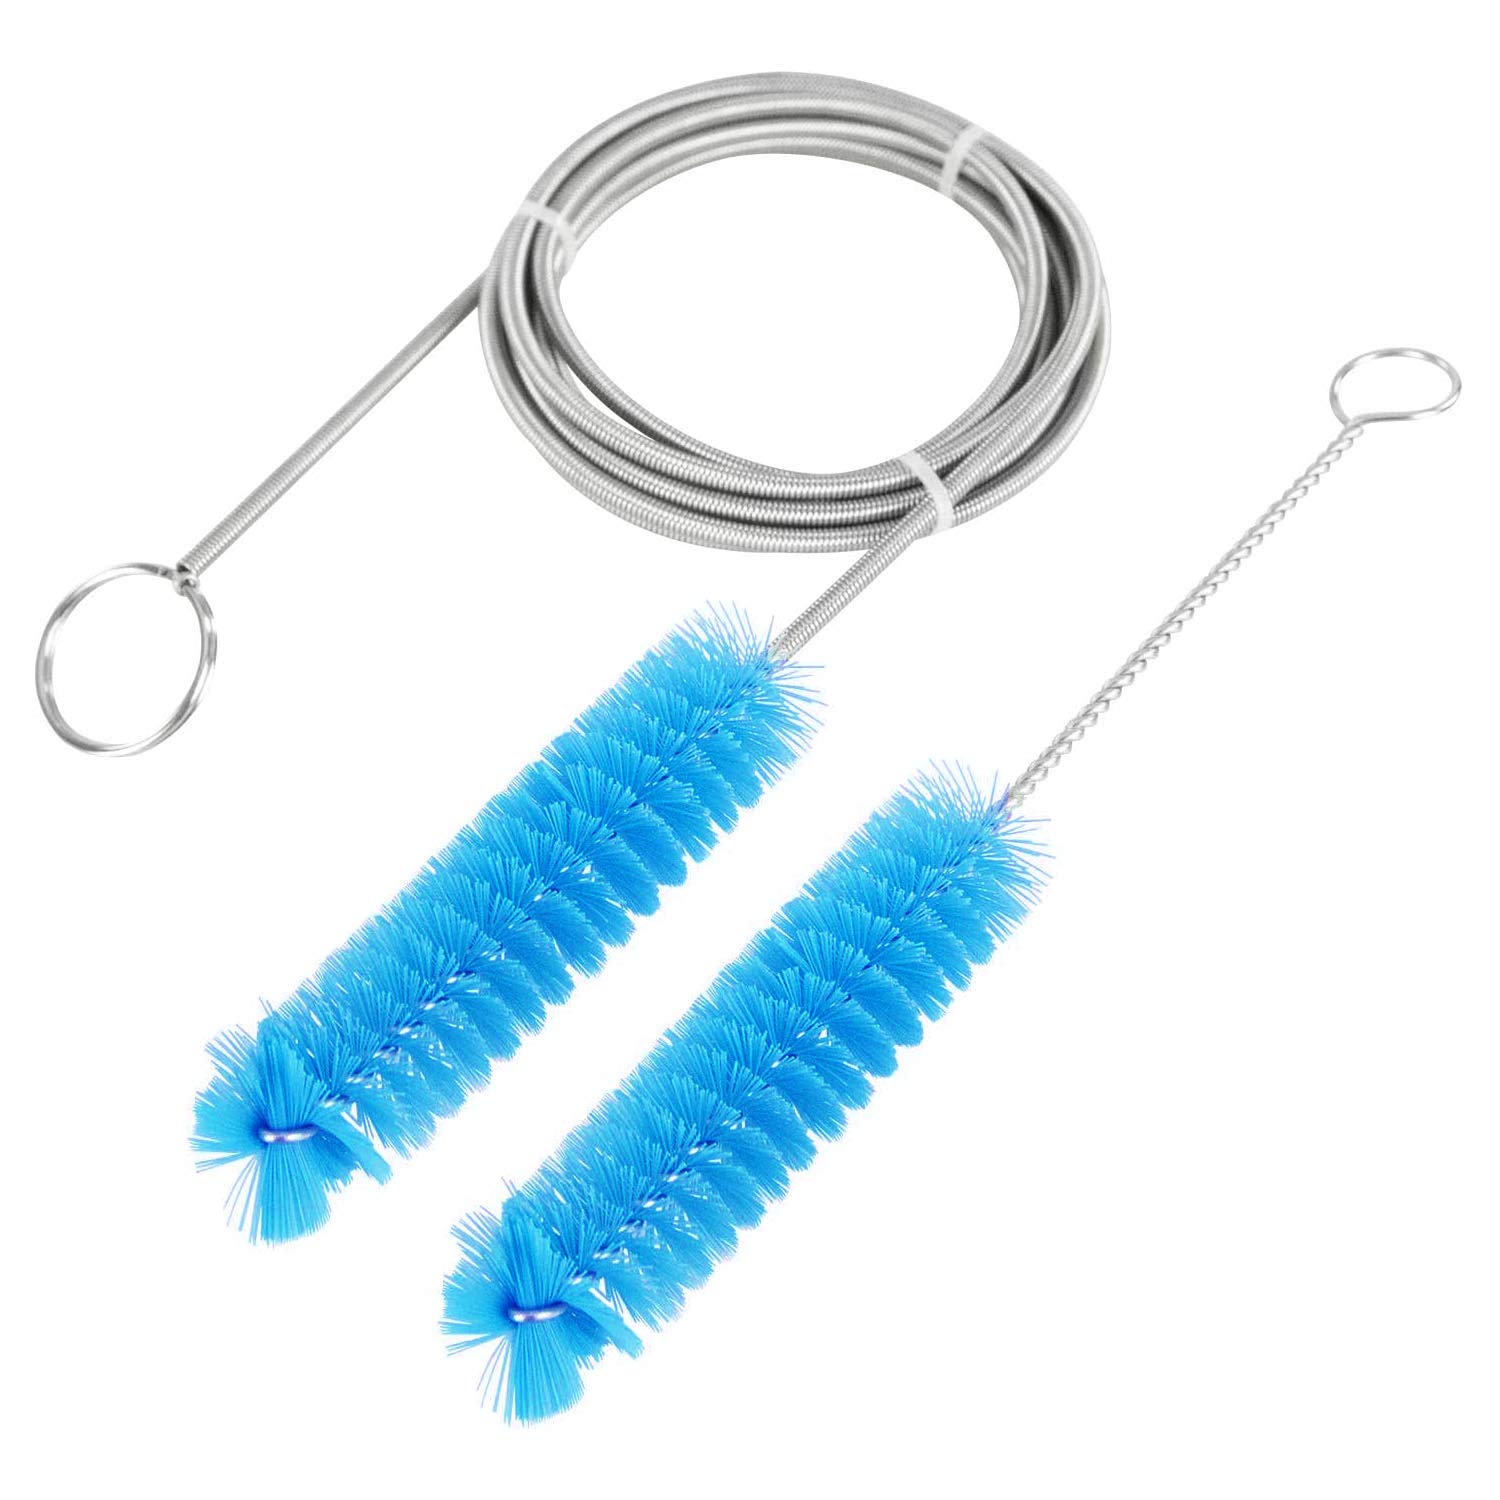 Stainless Steel Bristle Cleaning Brush